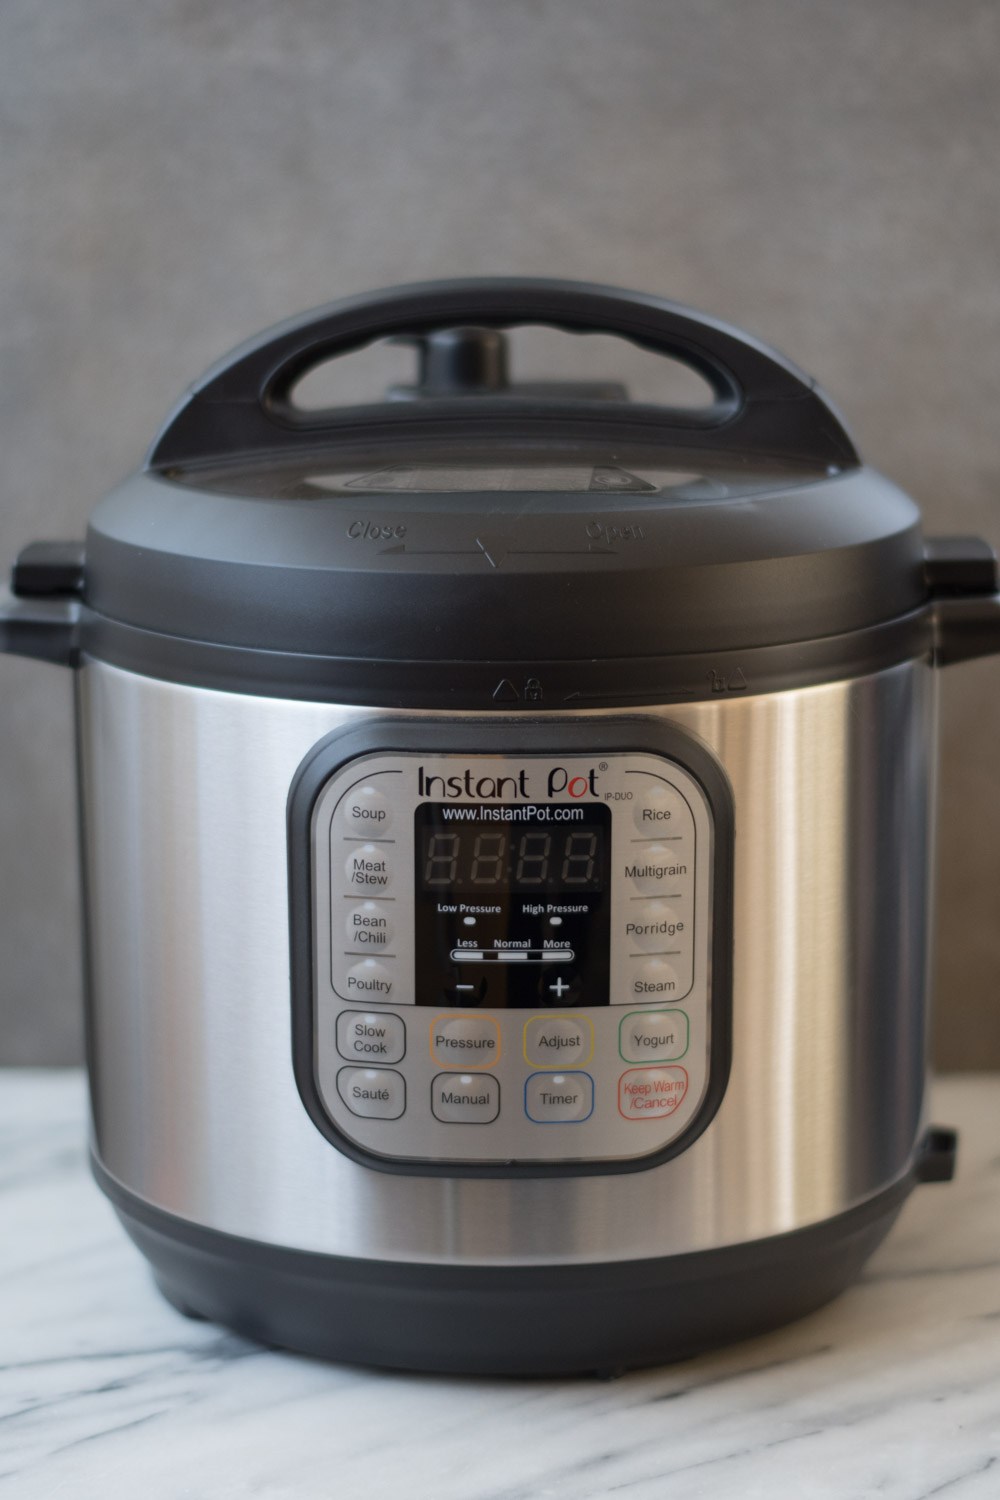 My Instant Pot, now a regular tool in my kitchen